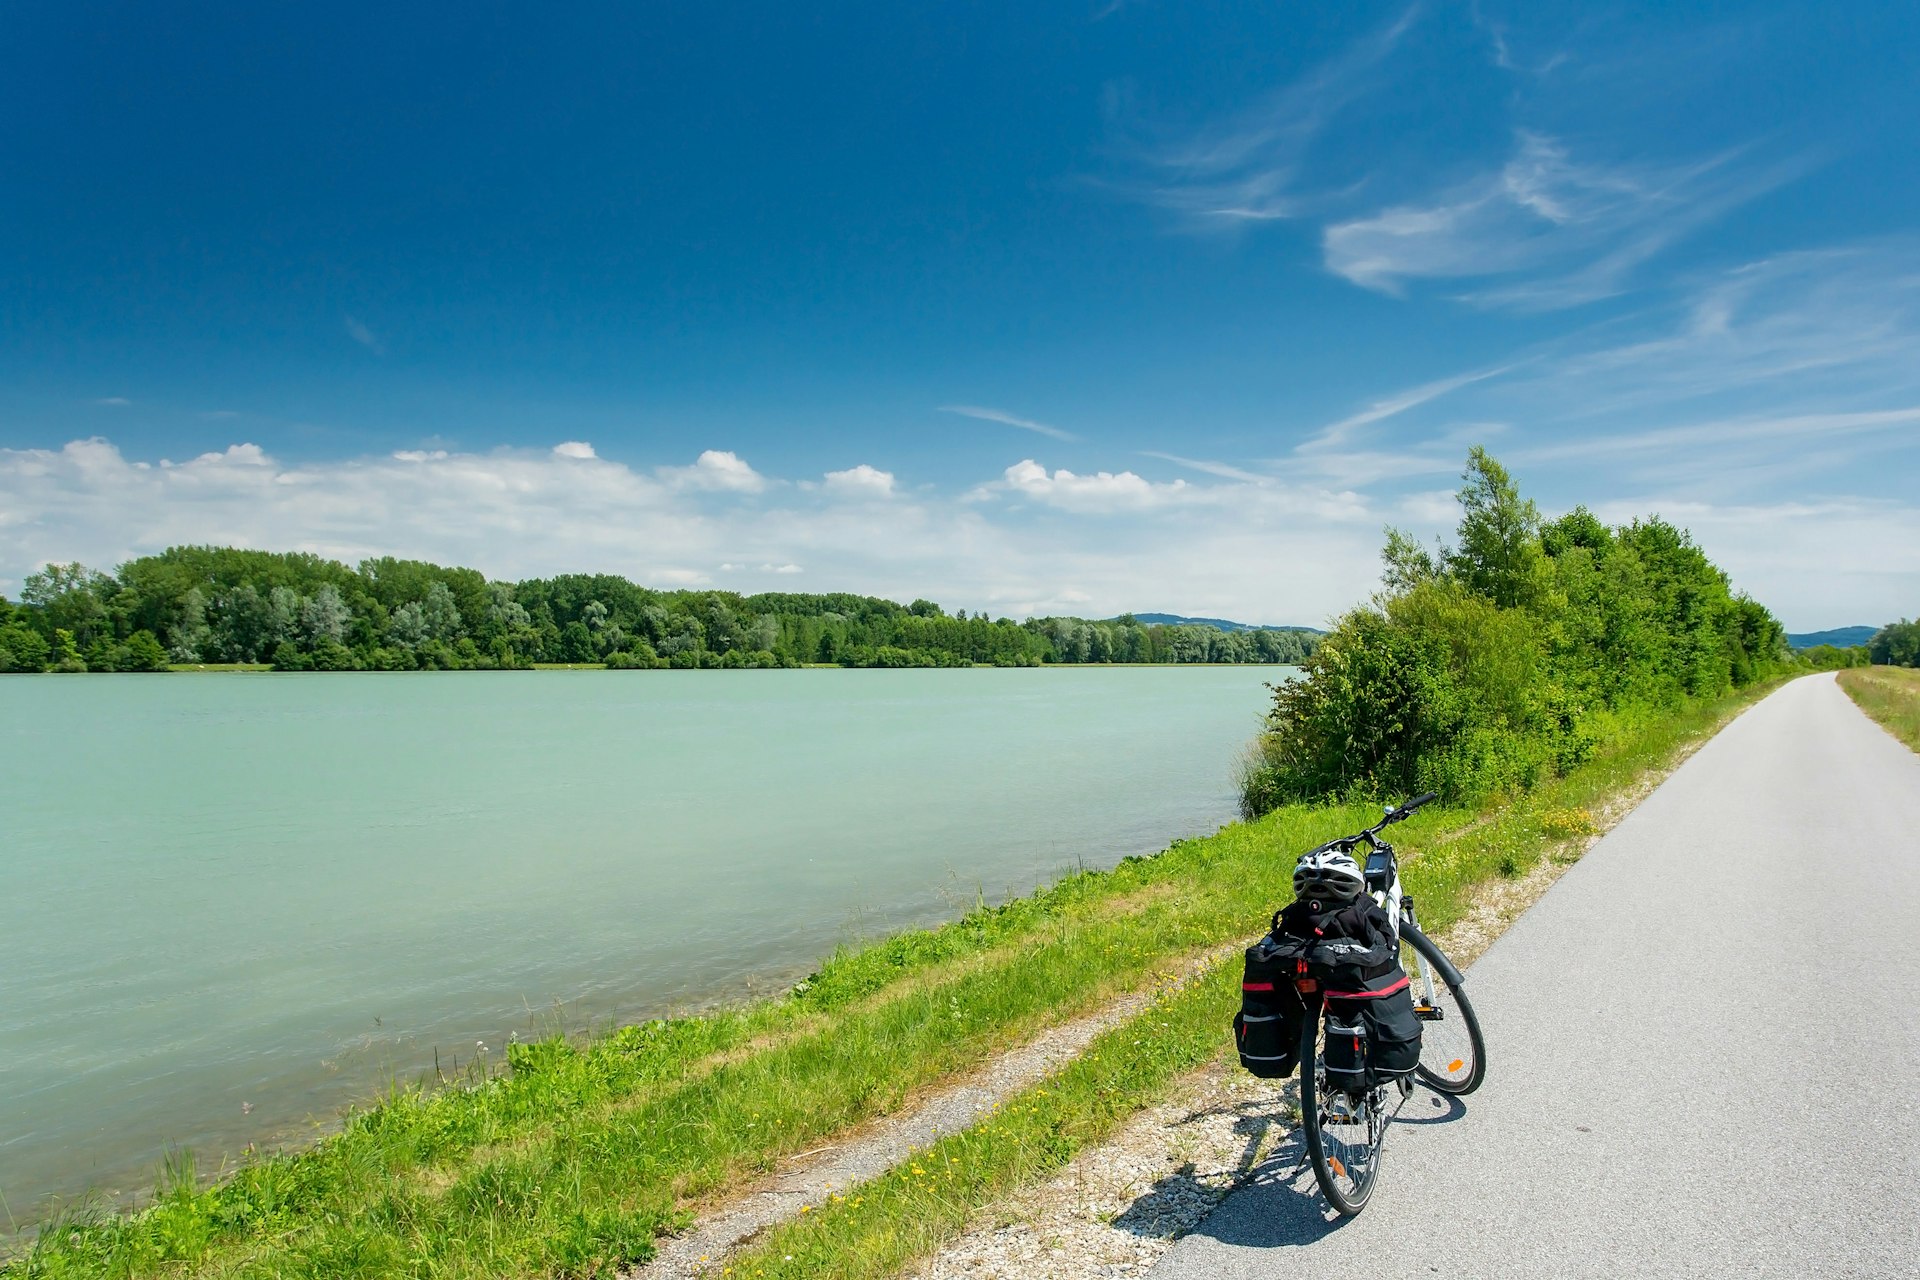 Danube cycle path in Germany in summer with a bike standing alone